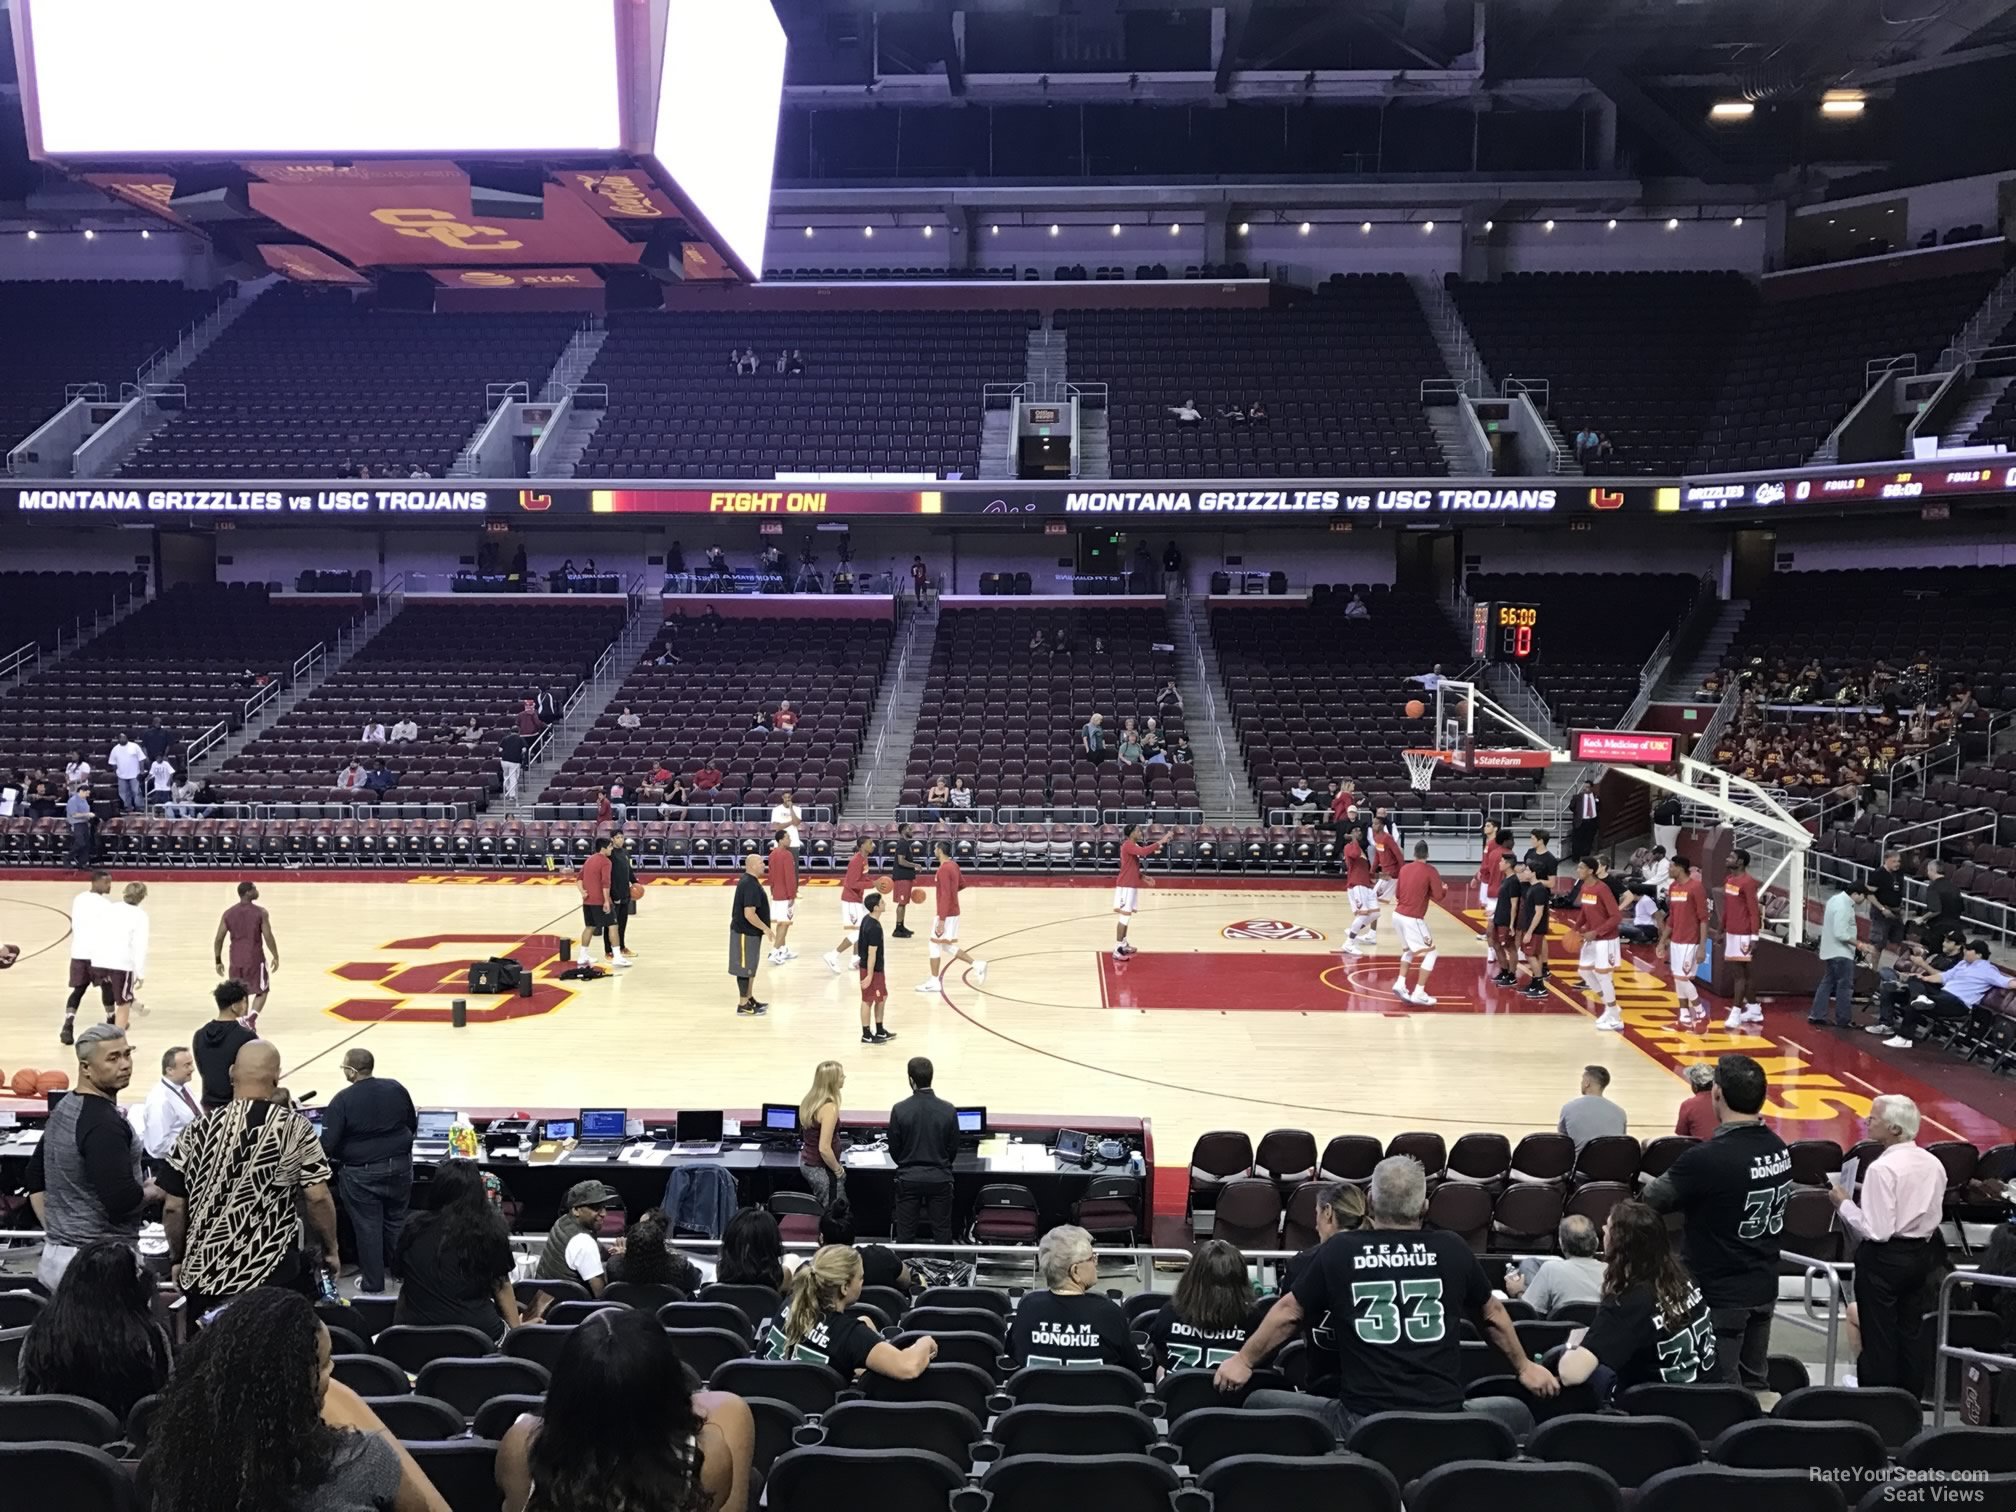 section 117, row 10 seat view  - galen center